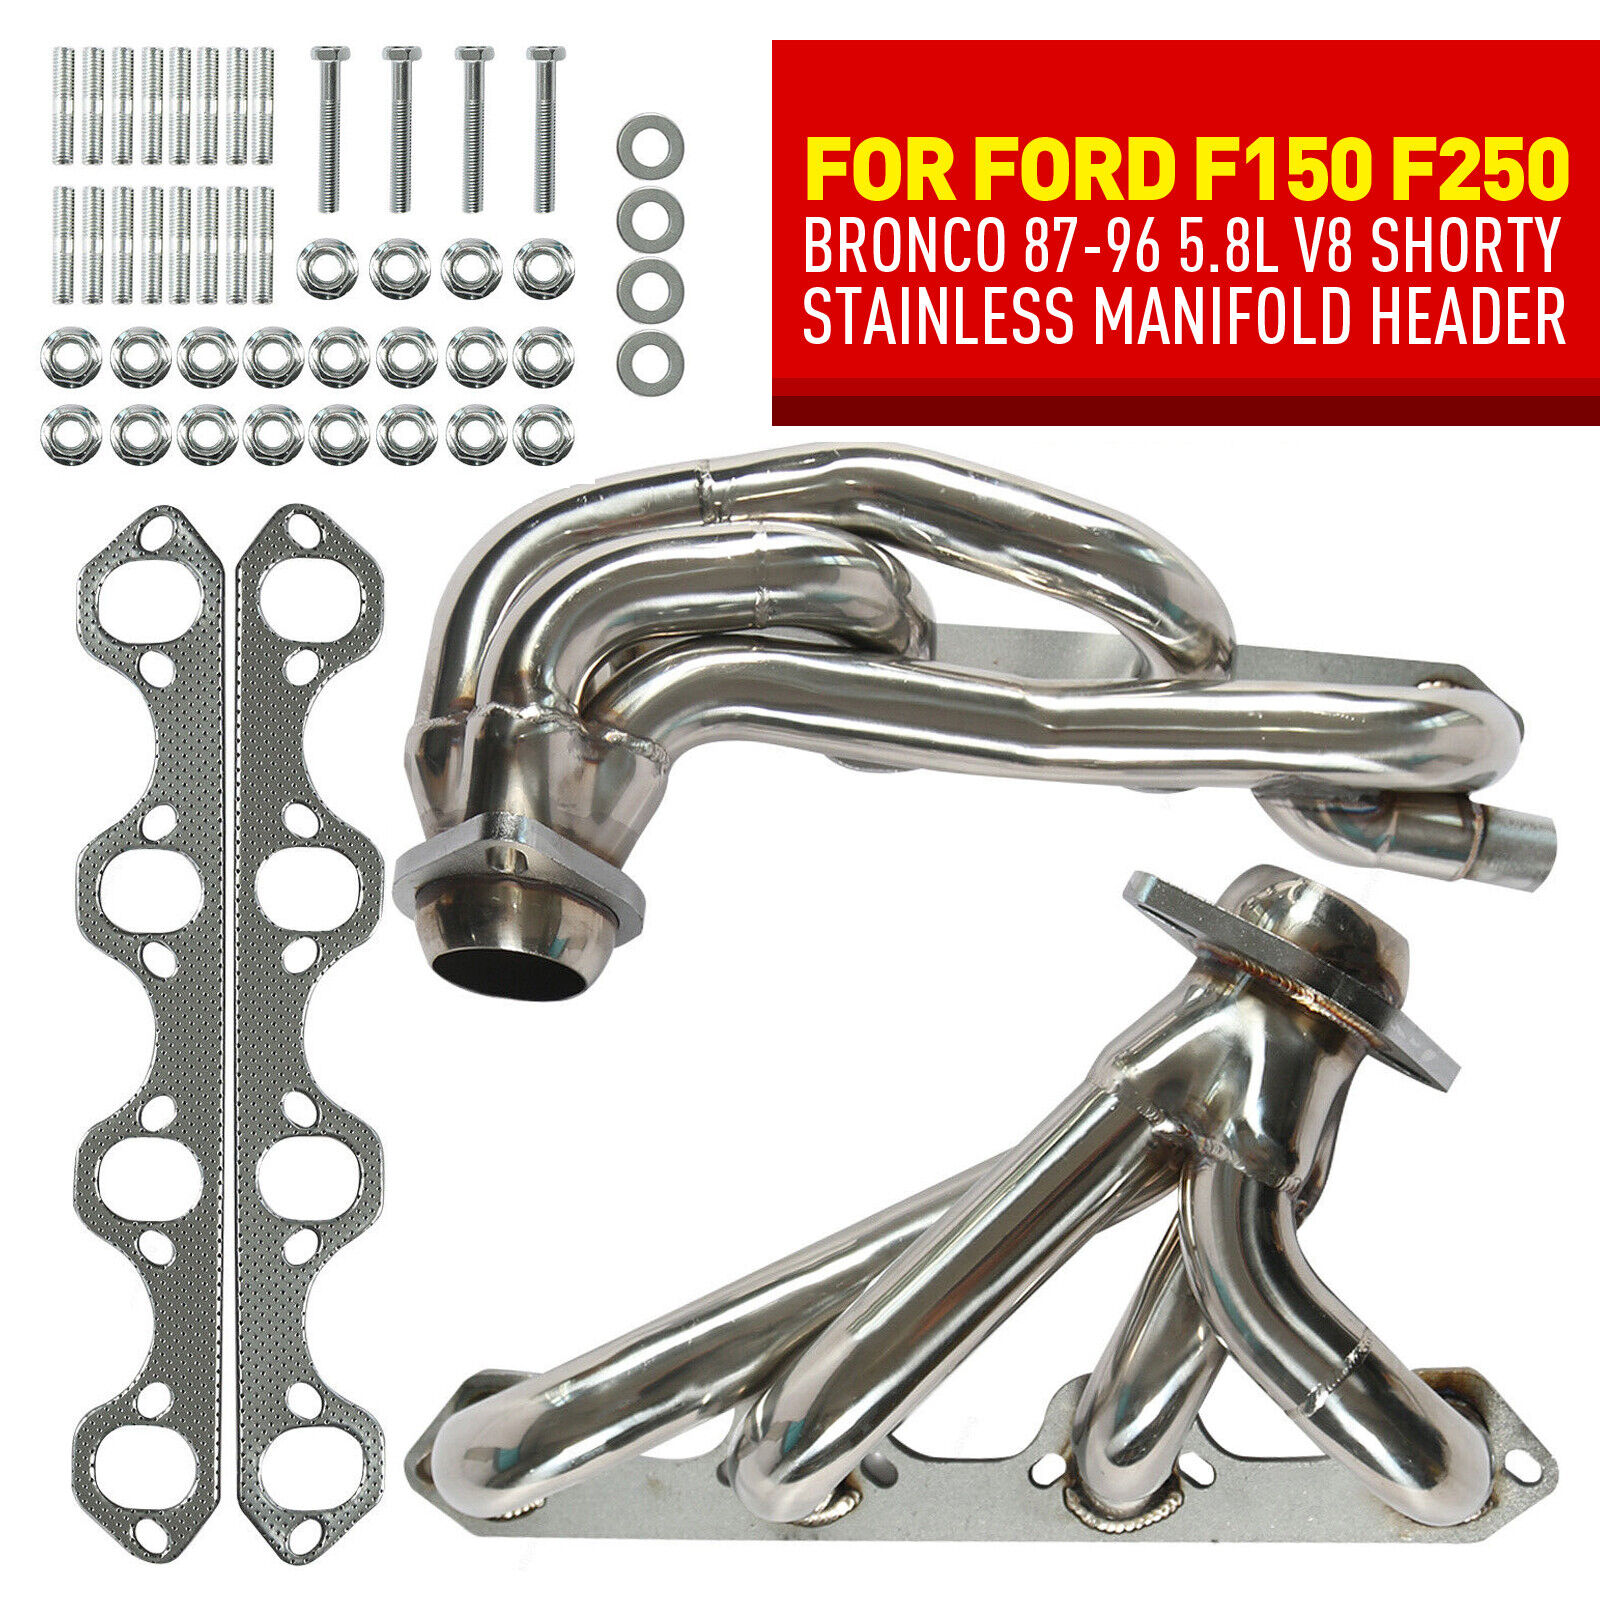 Stainless Manifold Headers Shorty fit for Ford F150 F250 Bronco 87-96 5.8L V8ll